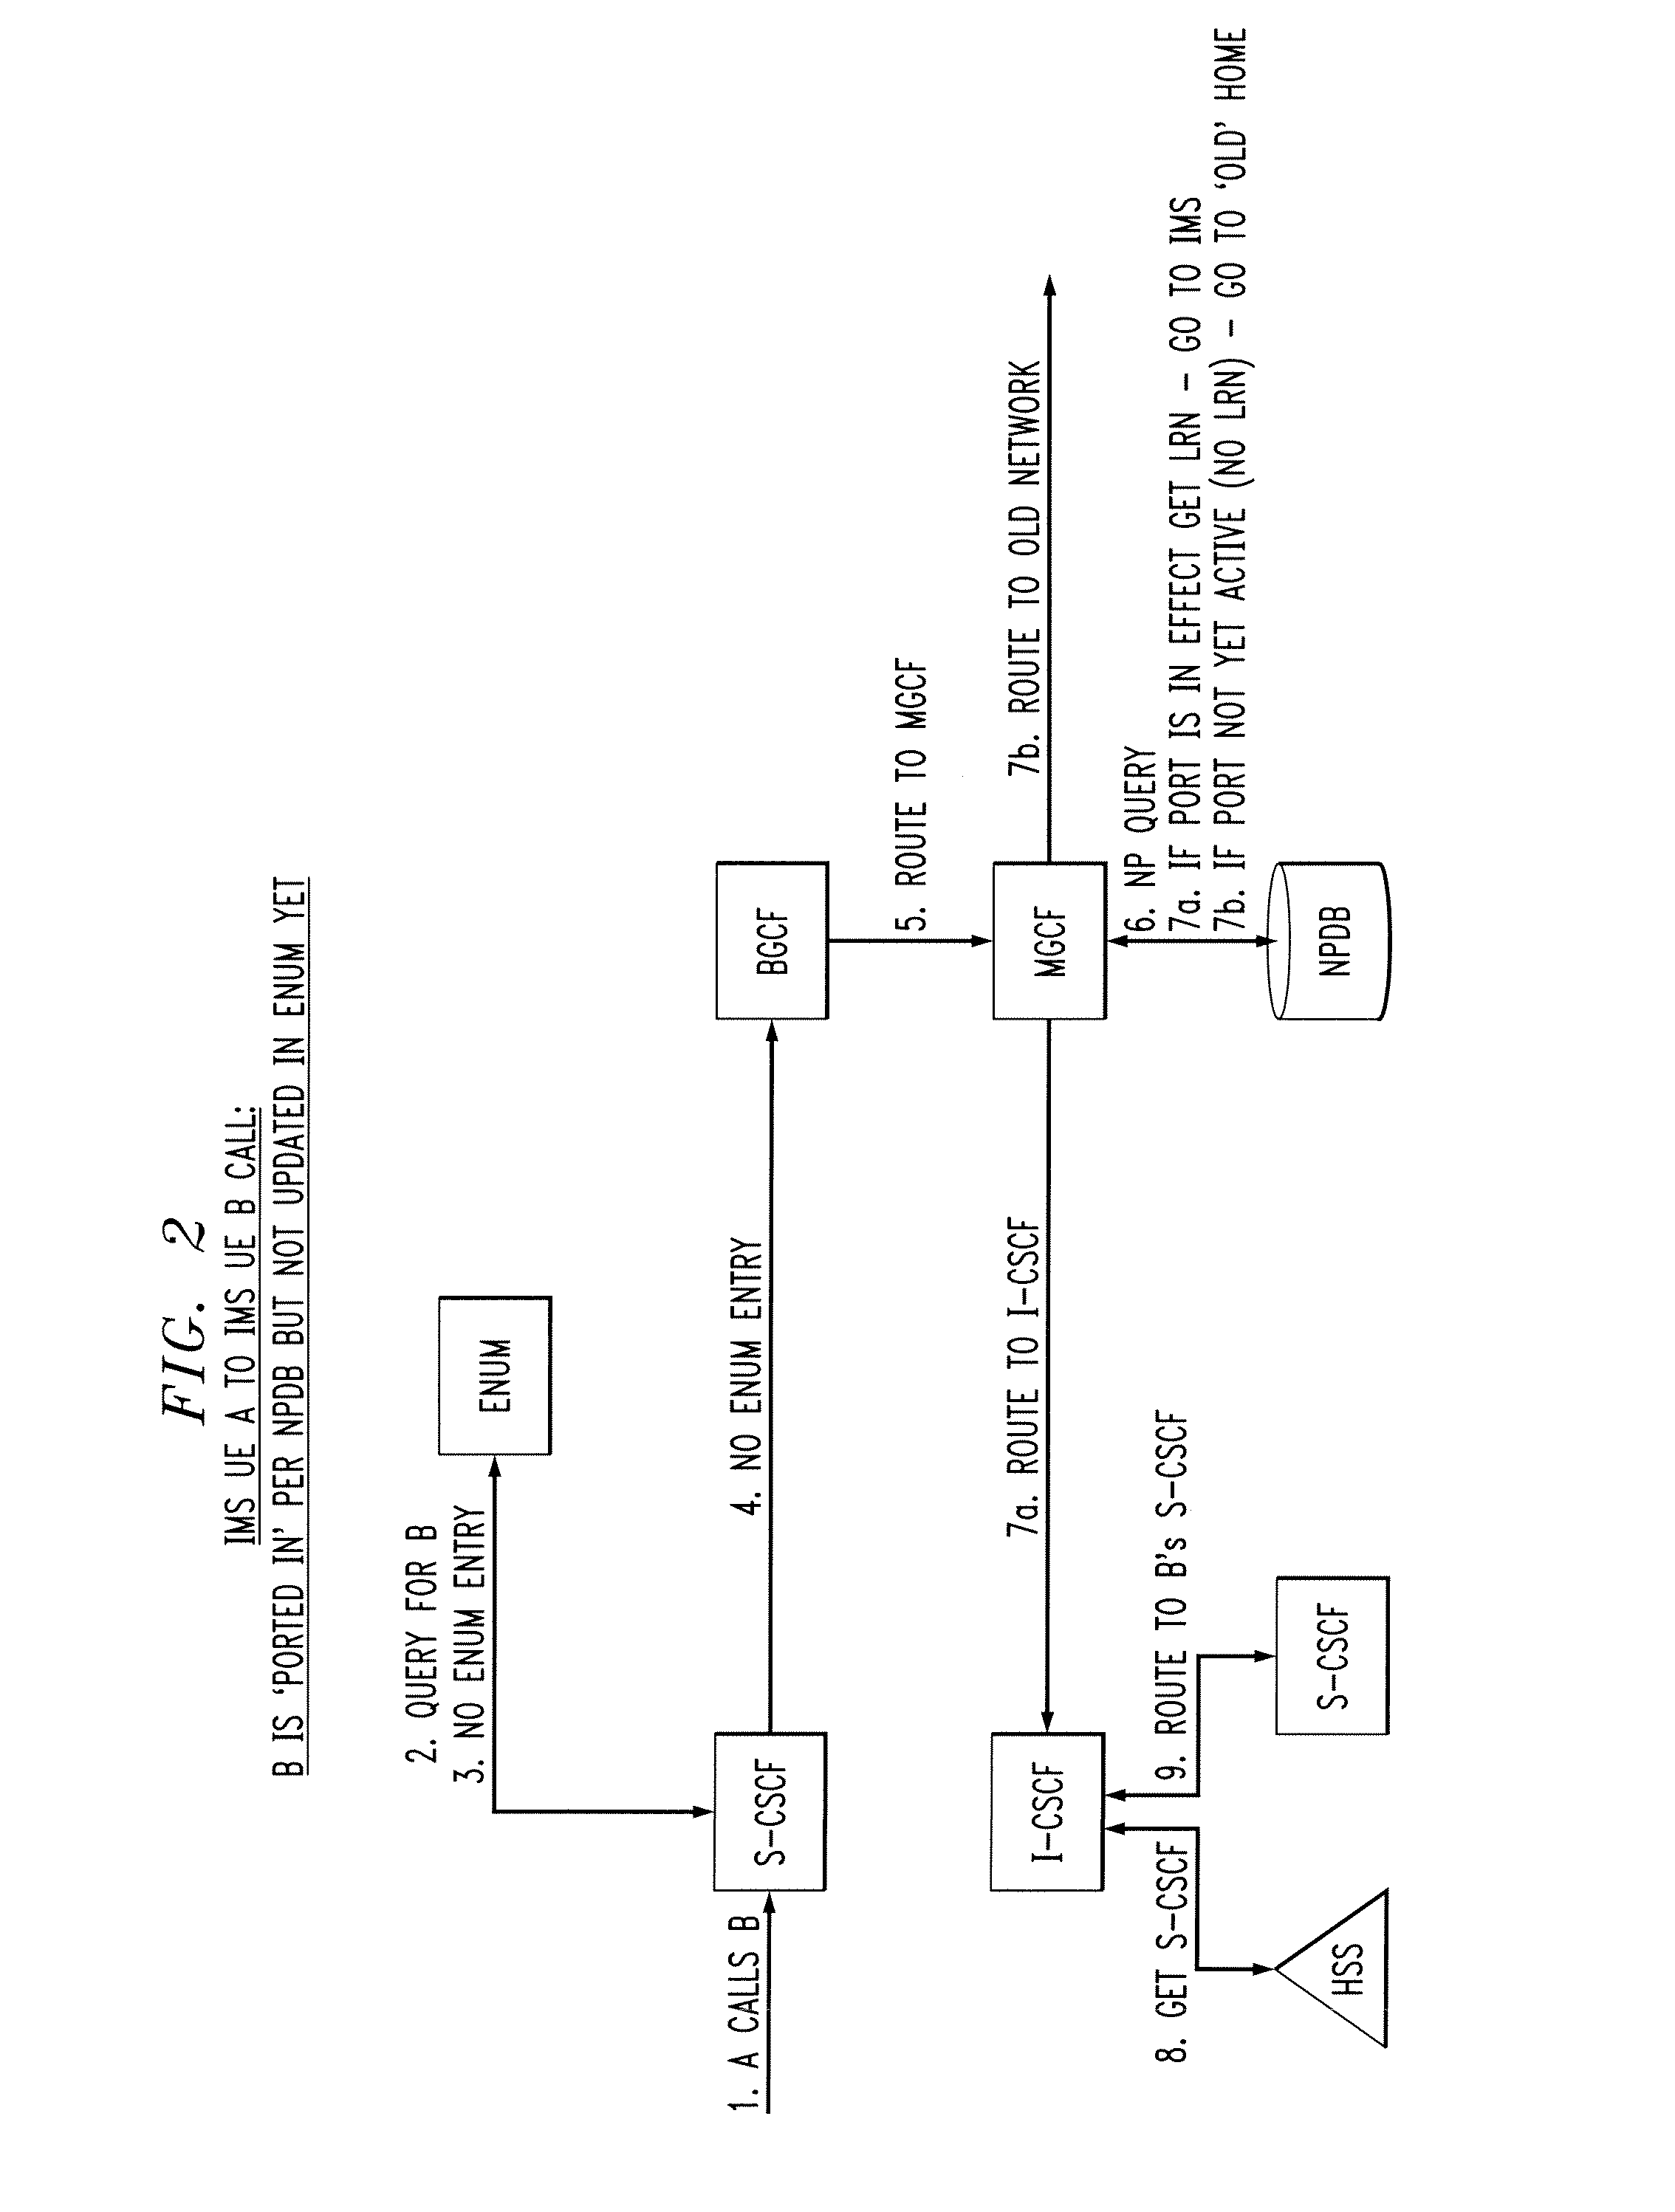 Method and apparatus for synchronizing ported number data